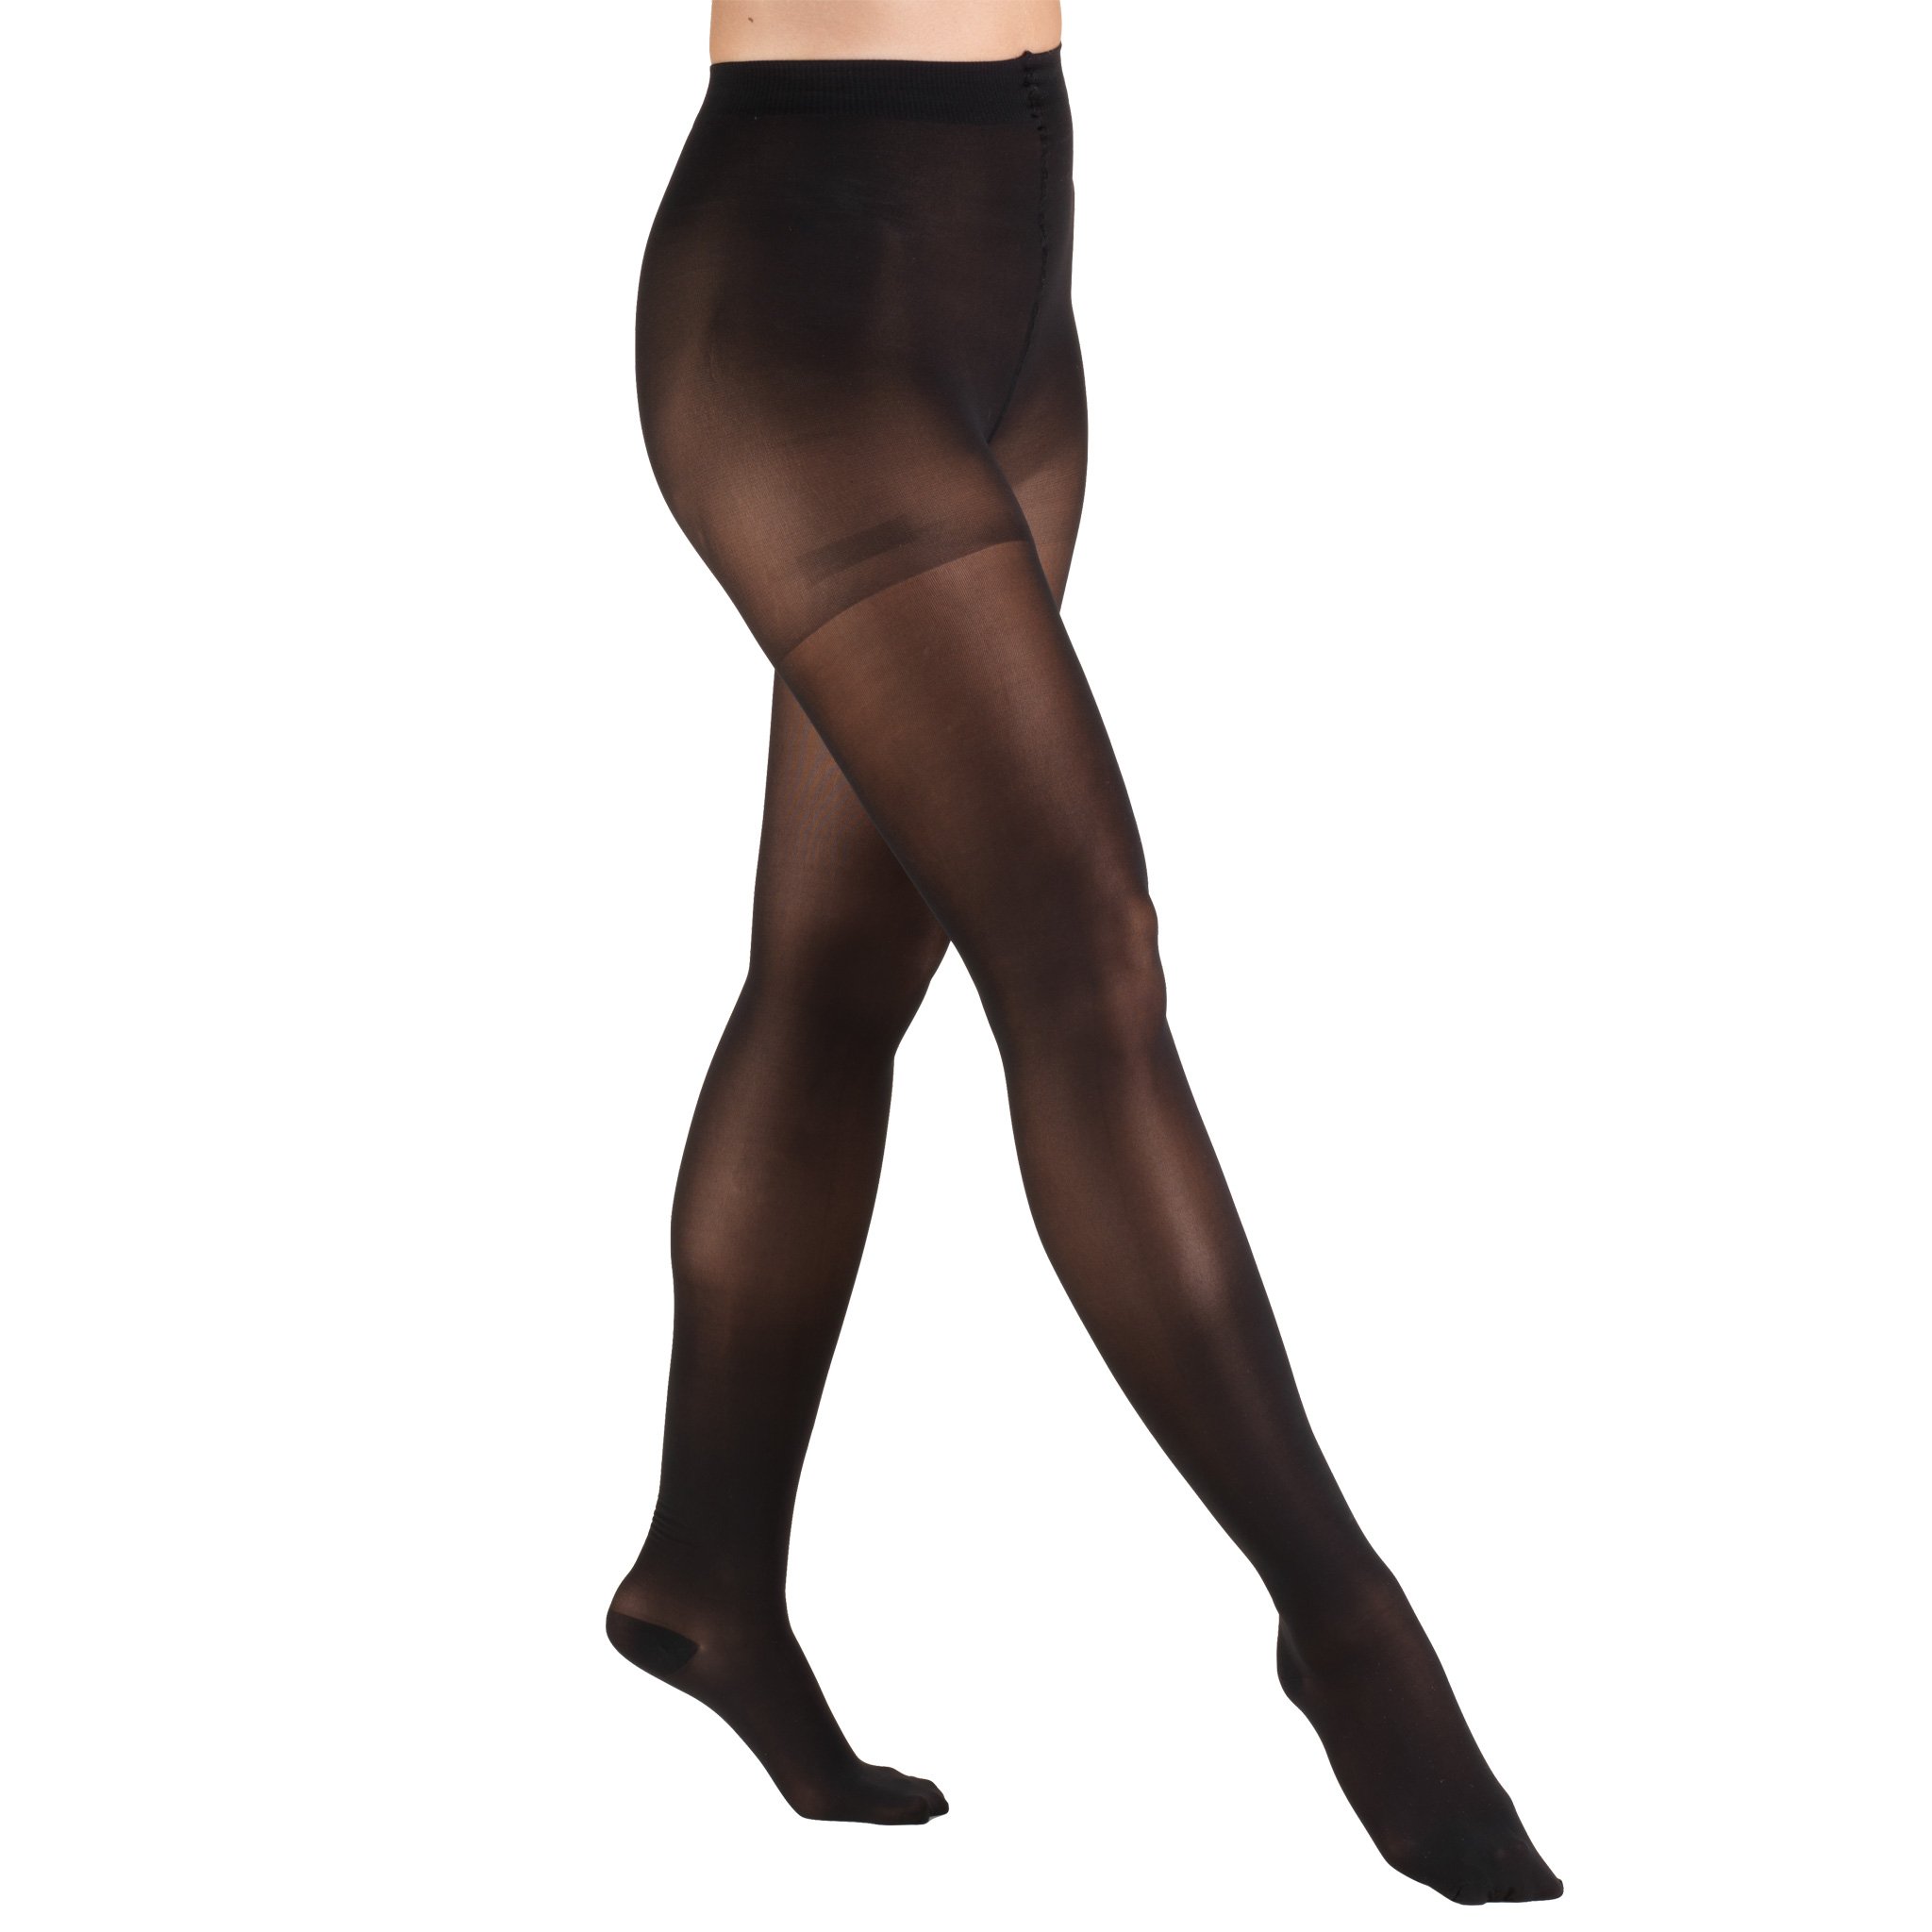 NEW*** Anti-Cellulite Compression Technology 40 denier Sheer-to